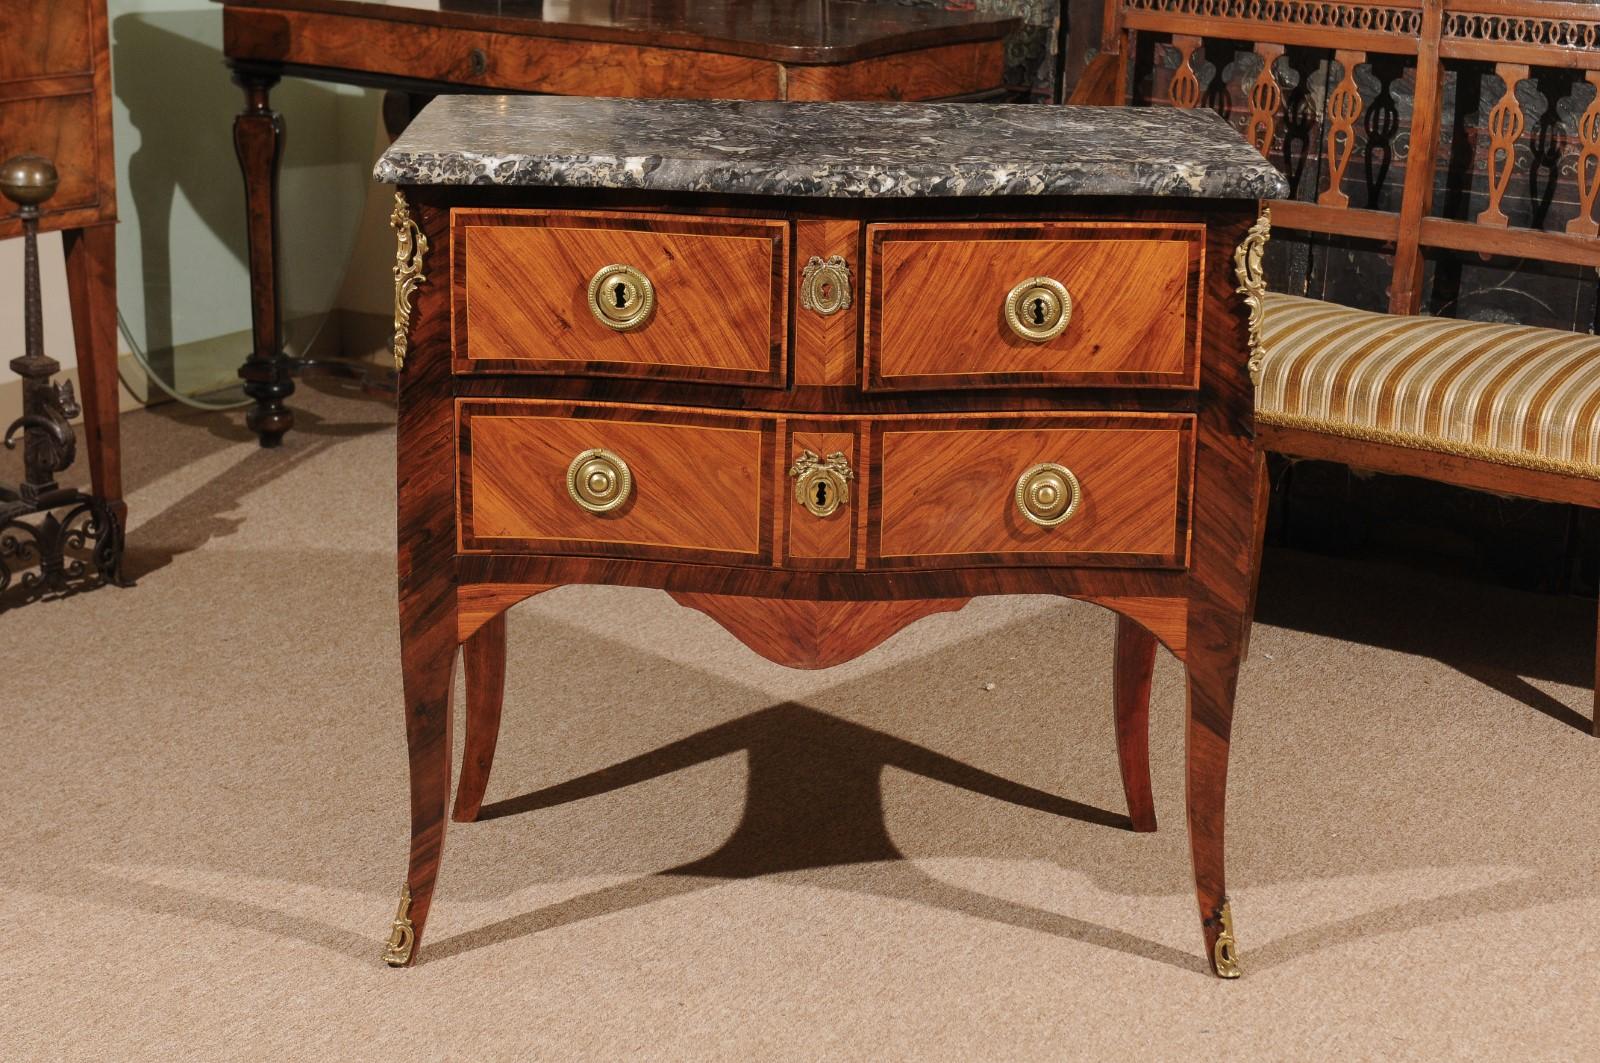 Petite Louis XV Period Commode in Tulipwood with bronze dore mounts & grey marble top, France 18th century.